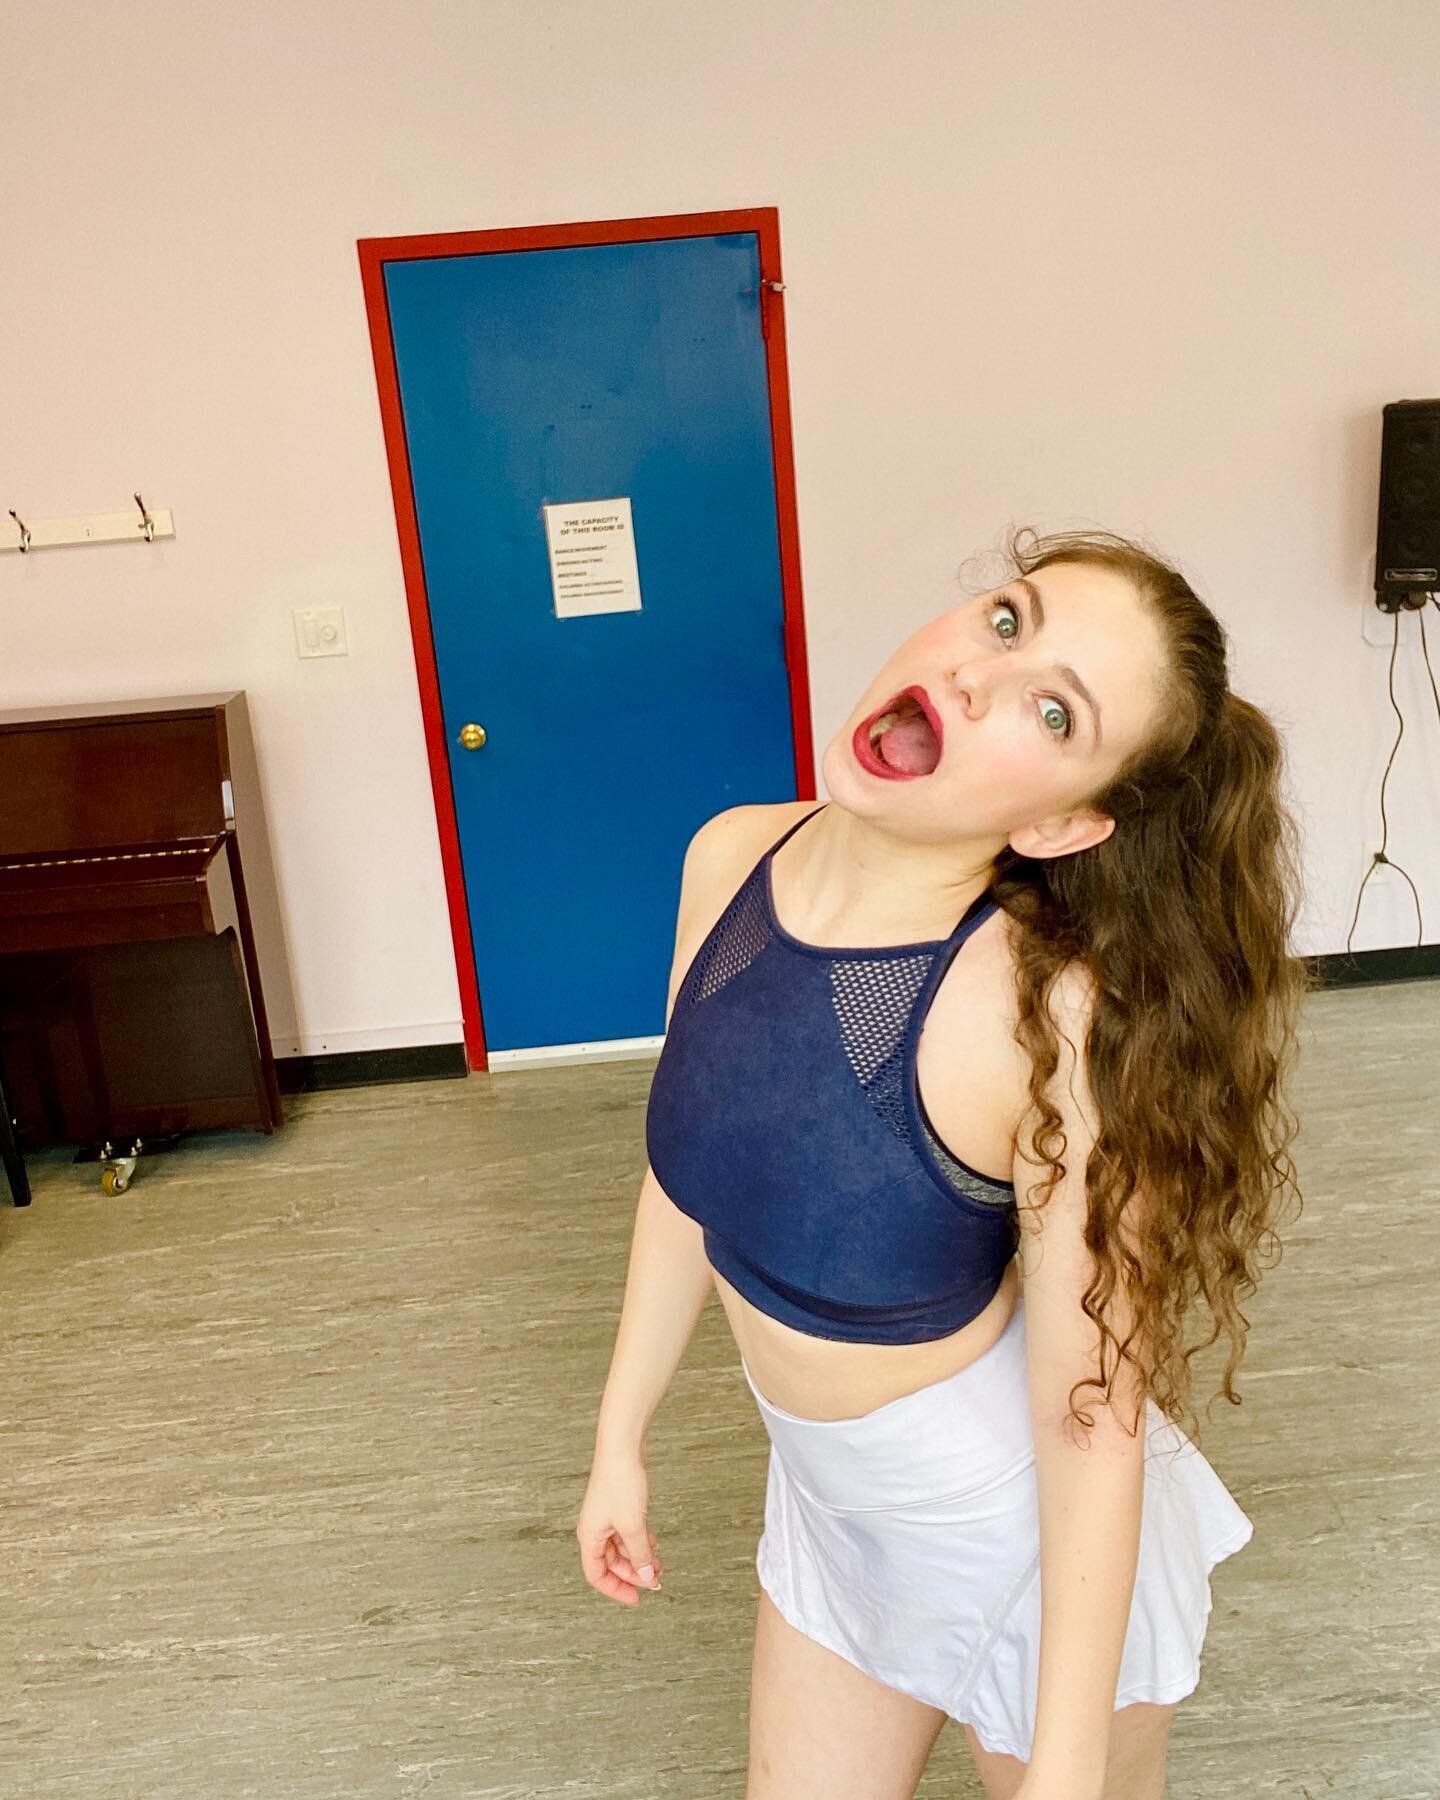 the face of lumbar spondylosis (also comphet)
.
.
.
.
.
.
.
.
.
.
#actor #singer #dancer #comphet #backpain #nyc #nycdancer #musicaltheatre